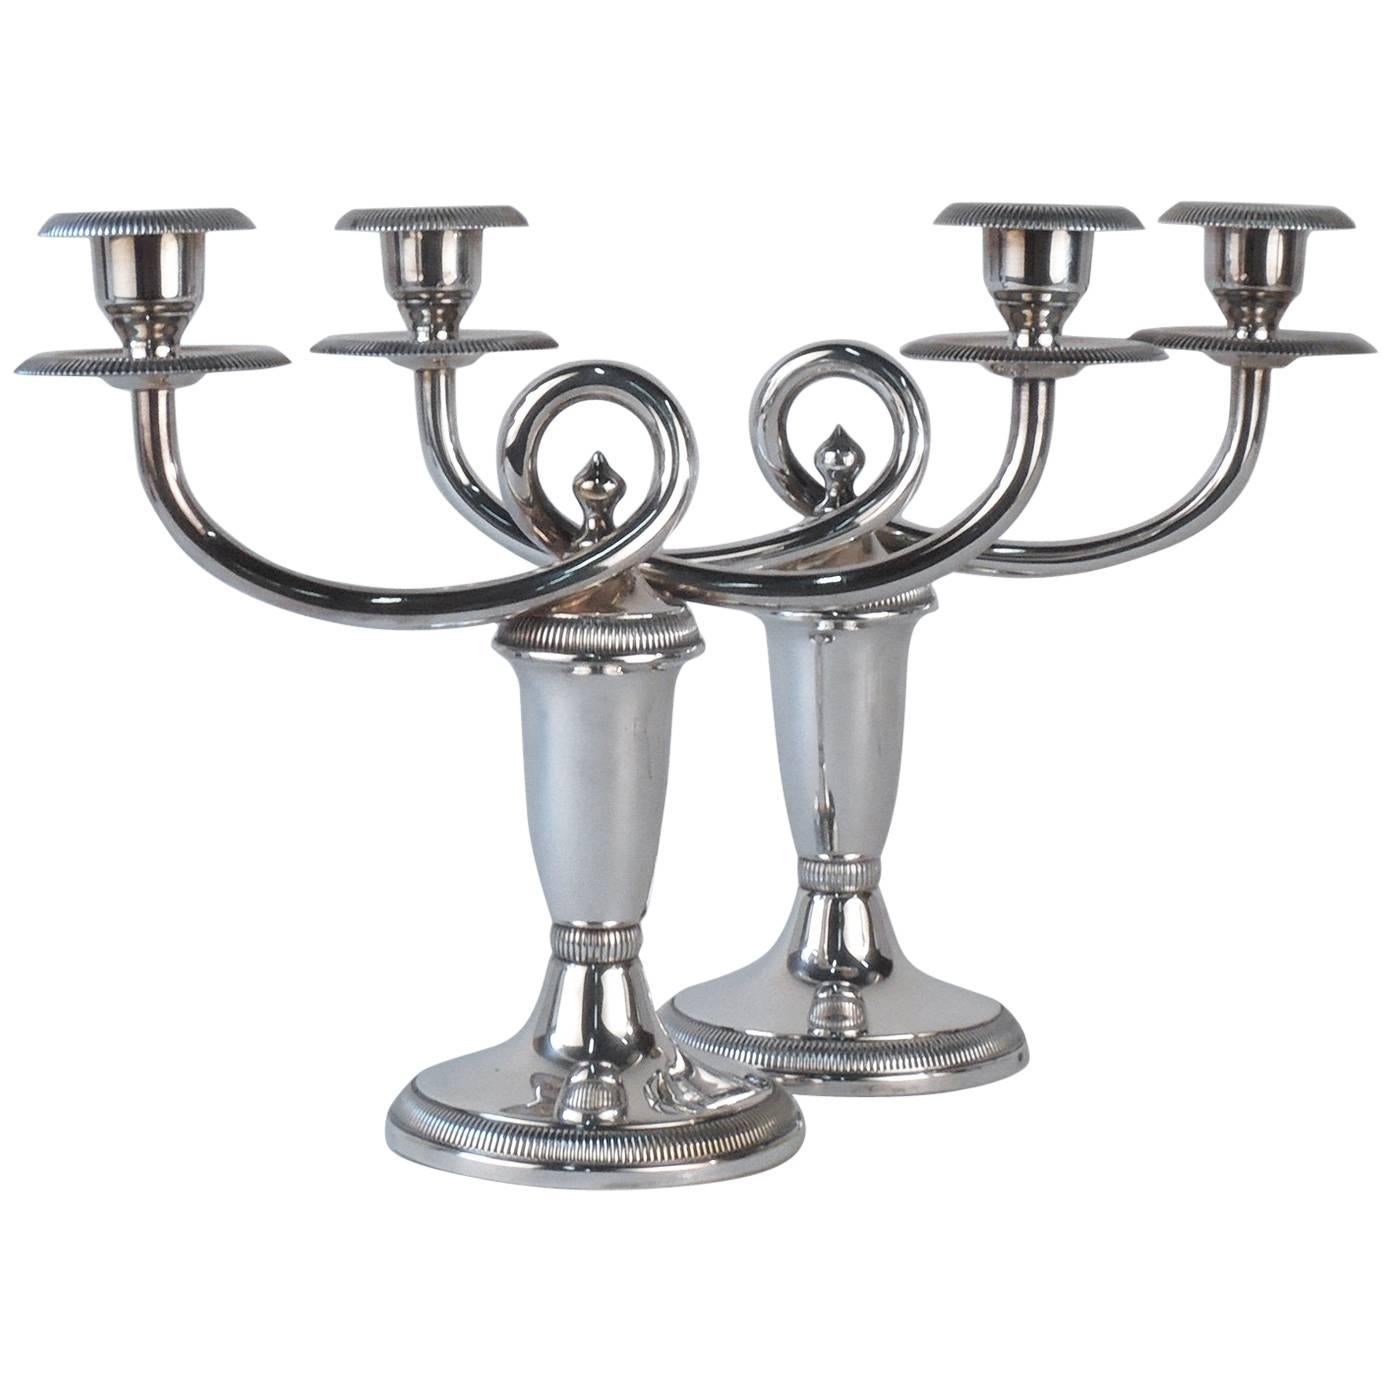 Pair of Christofle Gallia Silver Plated Double Candleholders or Candelabra